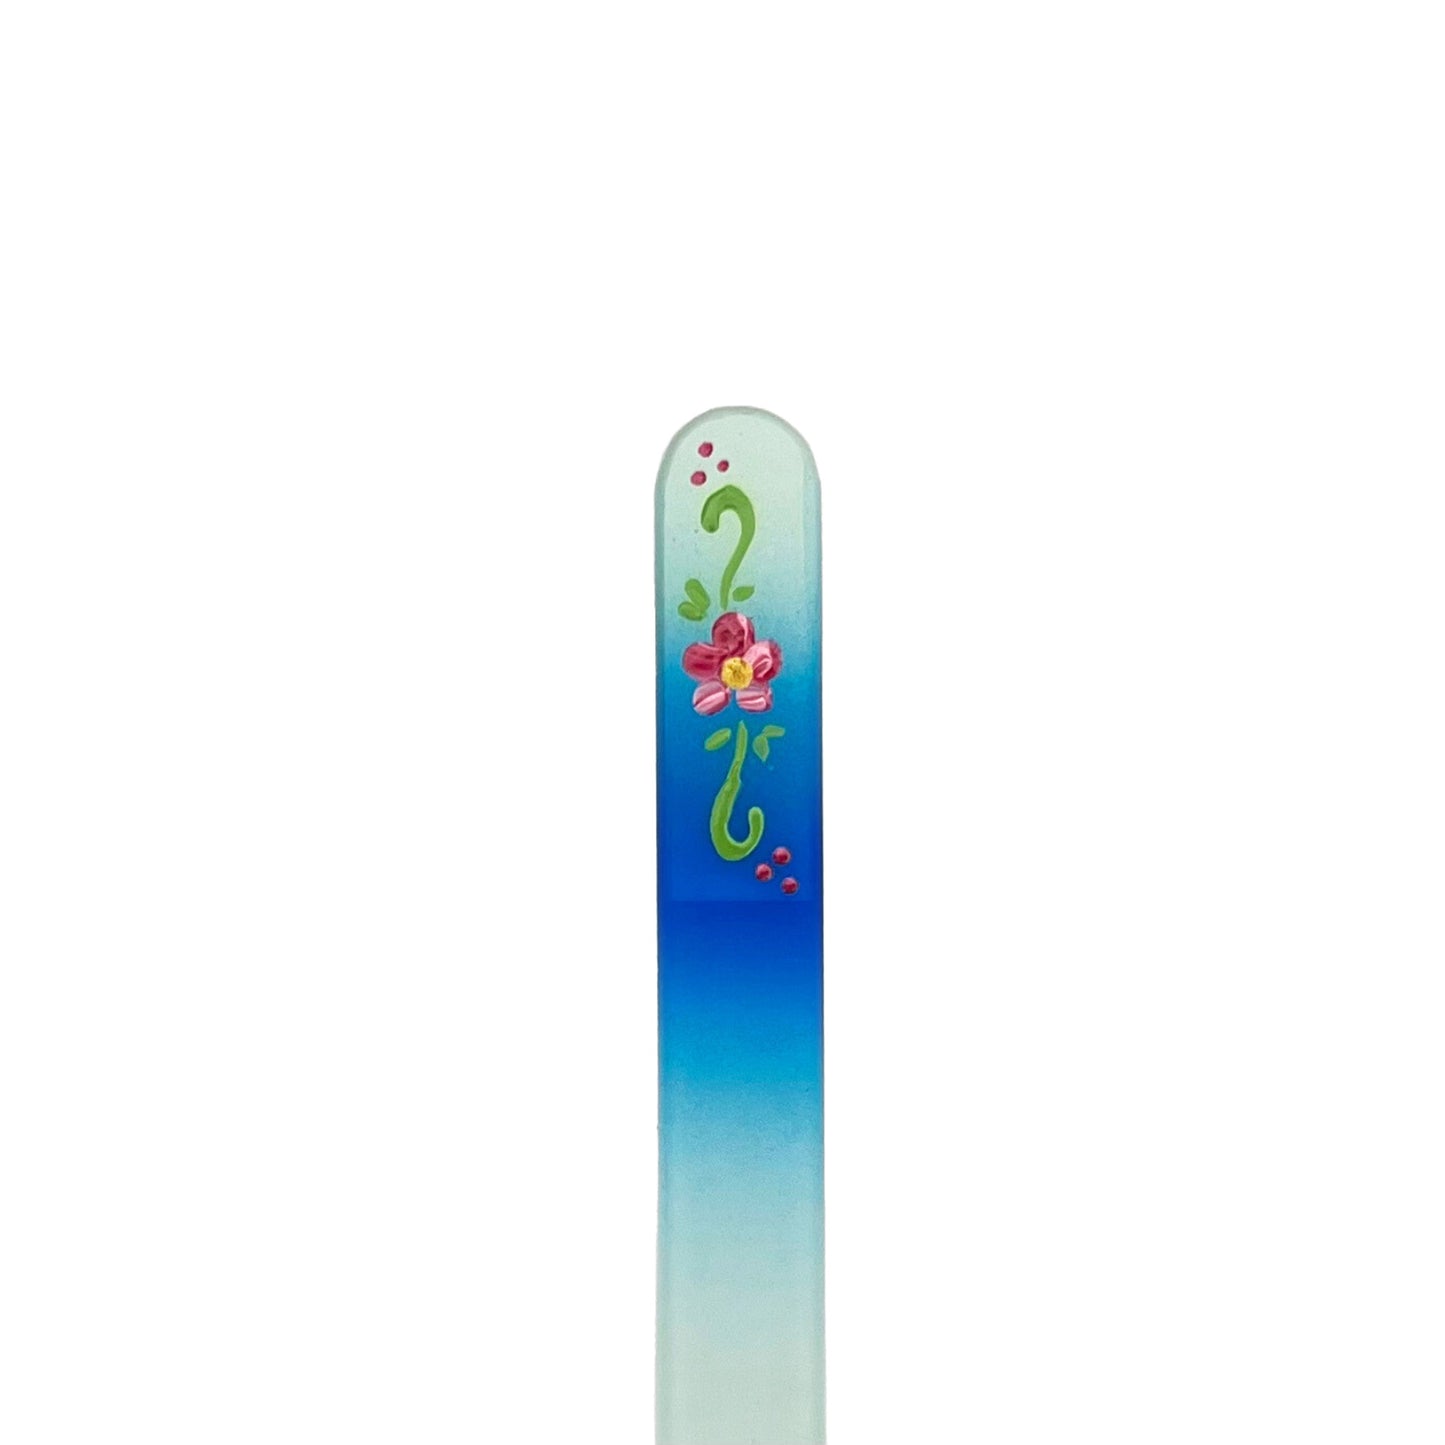 Light blue and blue glass nail file with hand painted pink flower